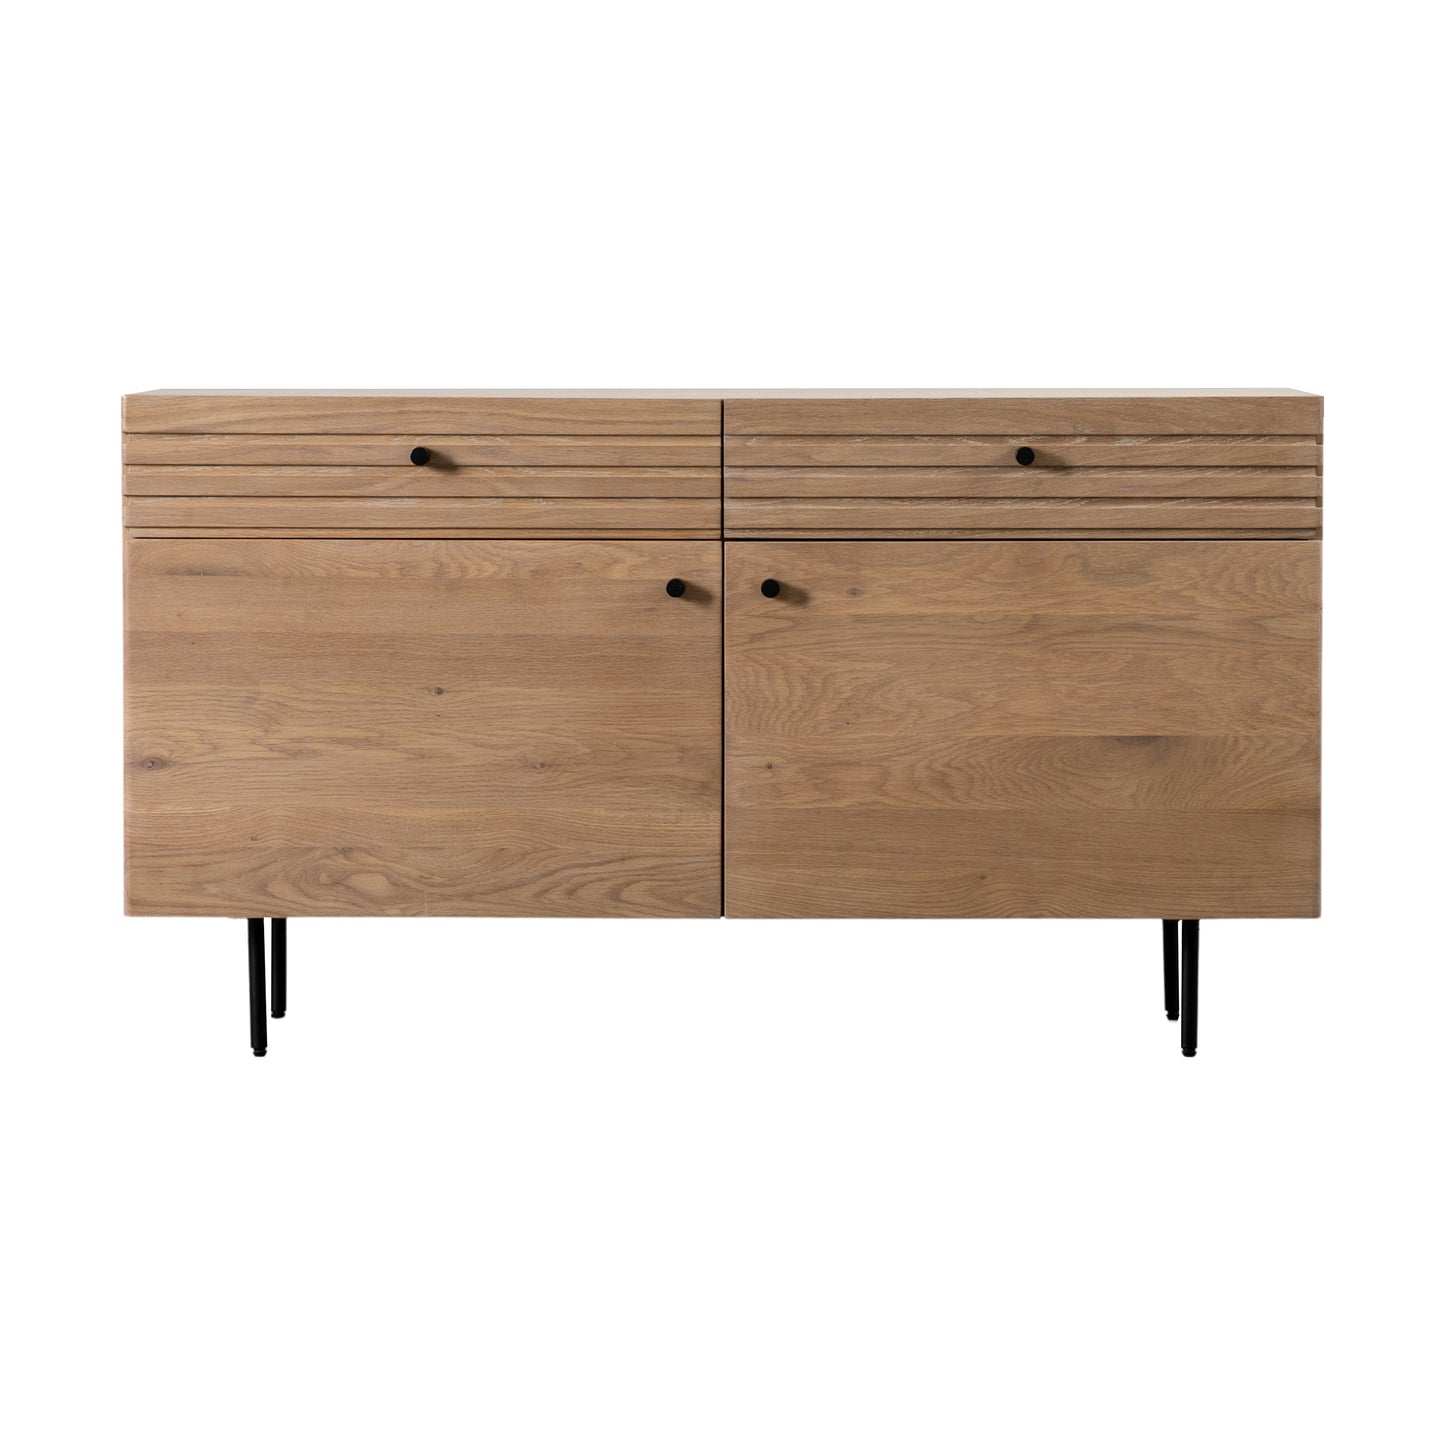 A Tortington 2 Drawer 2 Door Sideboard with black legs for interior decor by Kikiathome.co.uk.